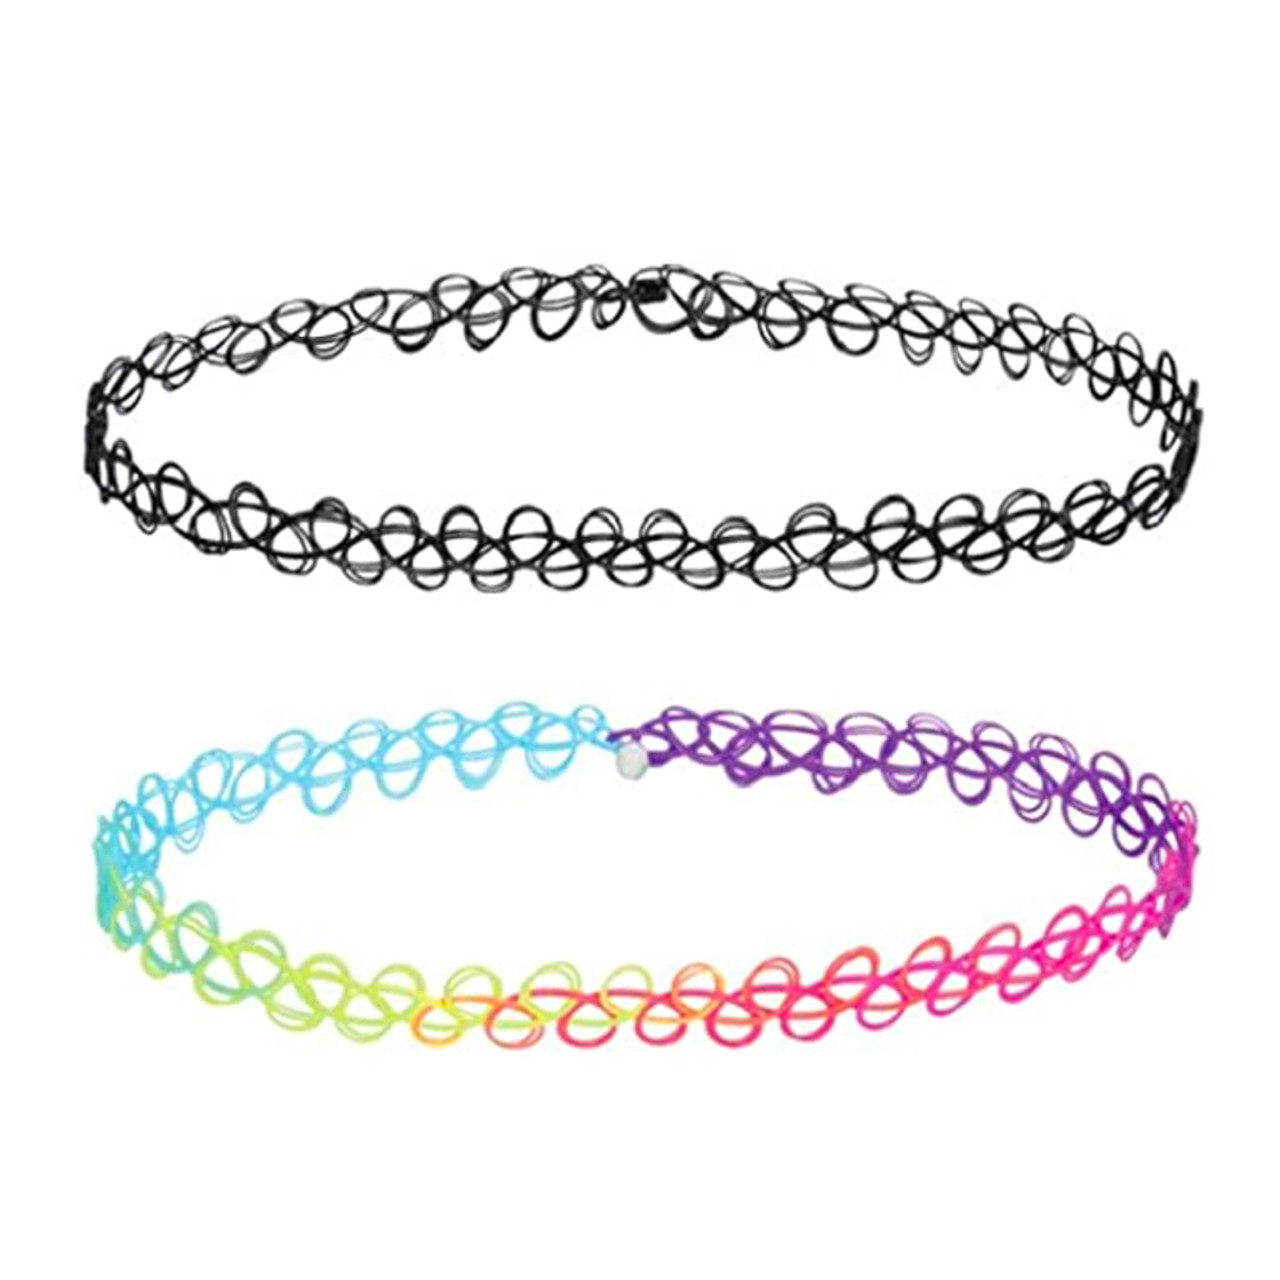 As if! The 90s are back with stretchable chokers